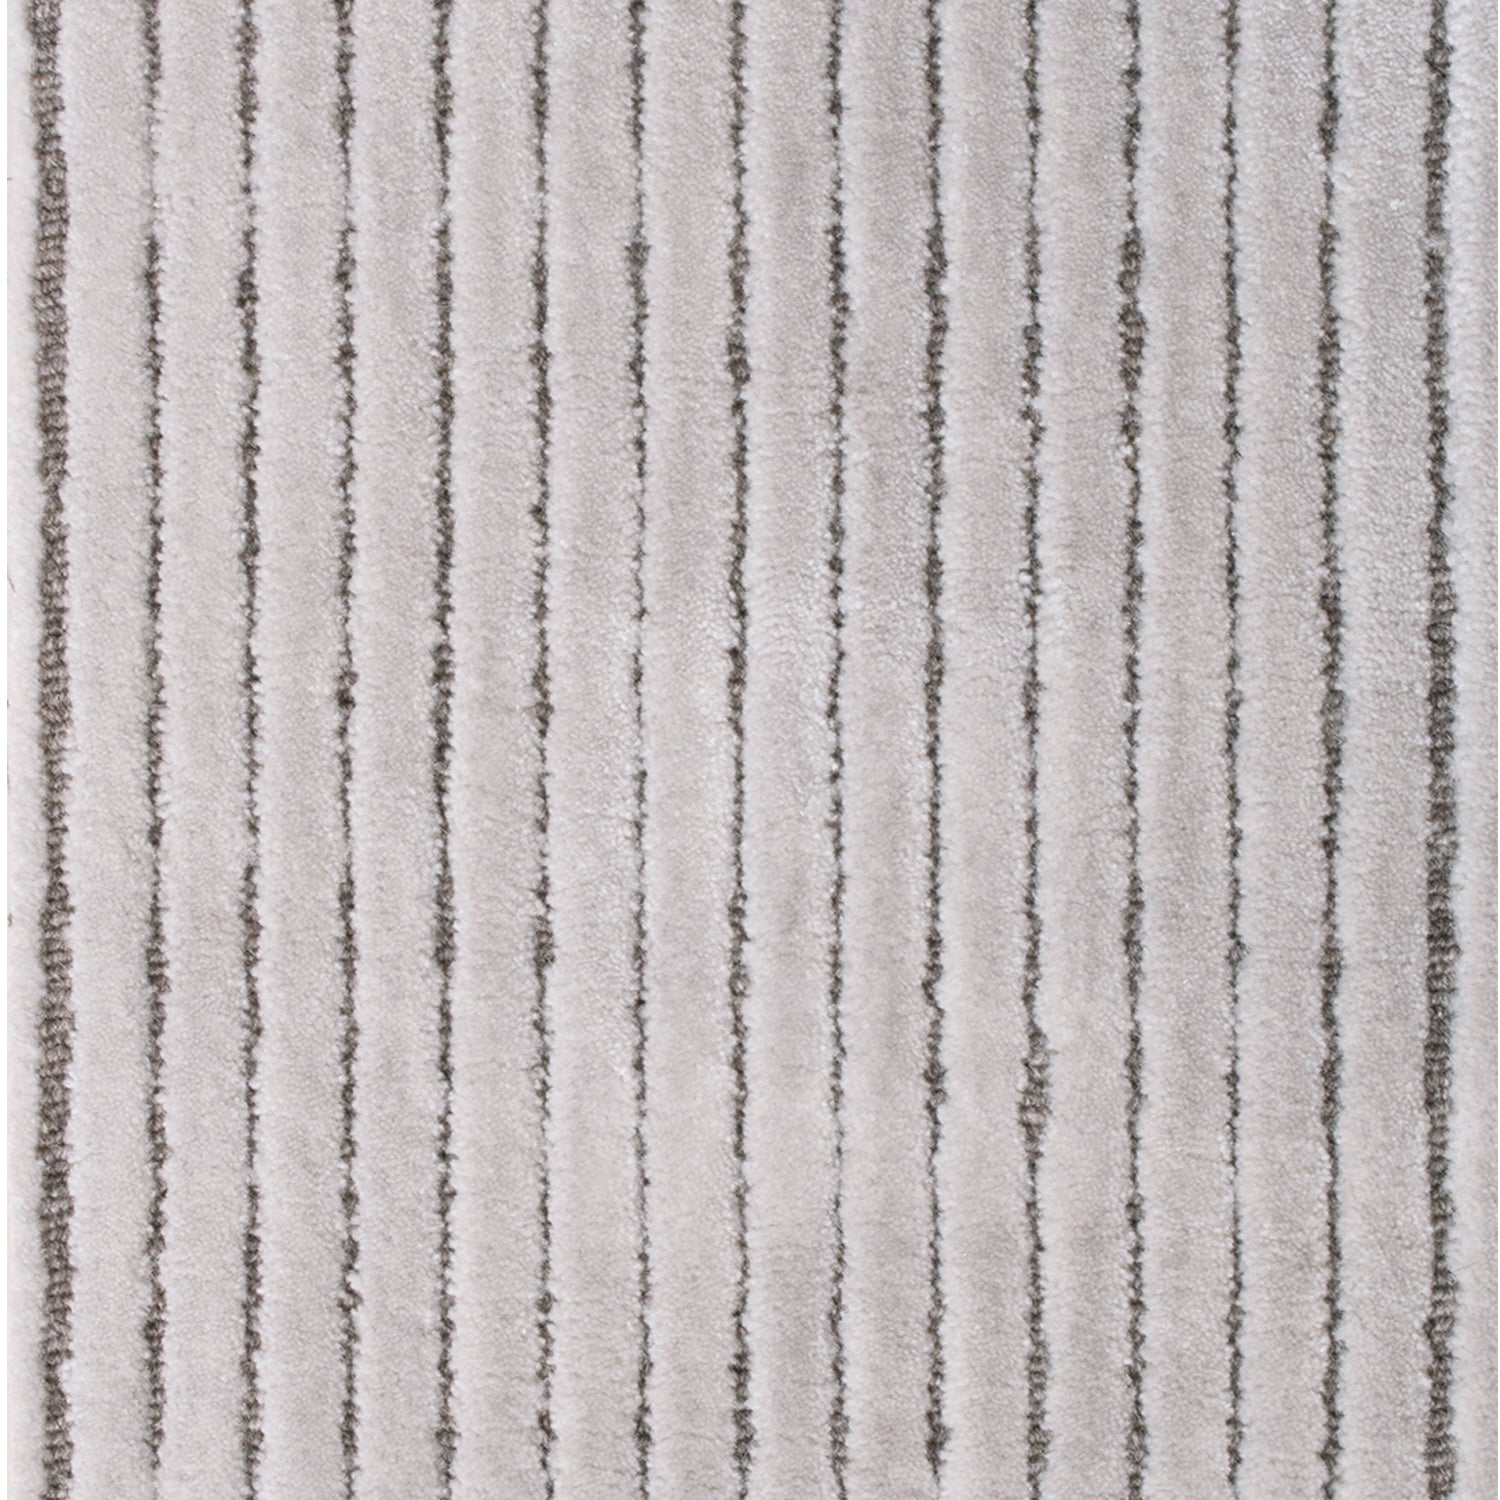 Wool-blend broadloom carpet swatch in a dimensional ribbed weave in greige and gray.